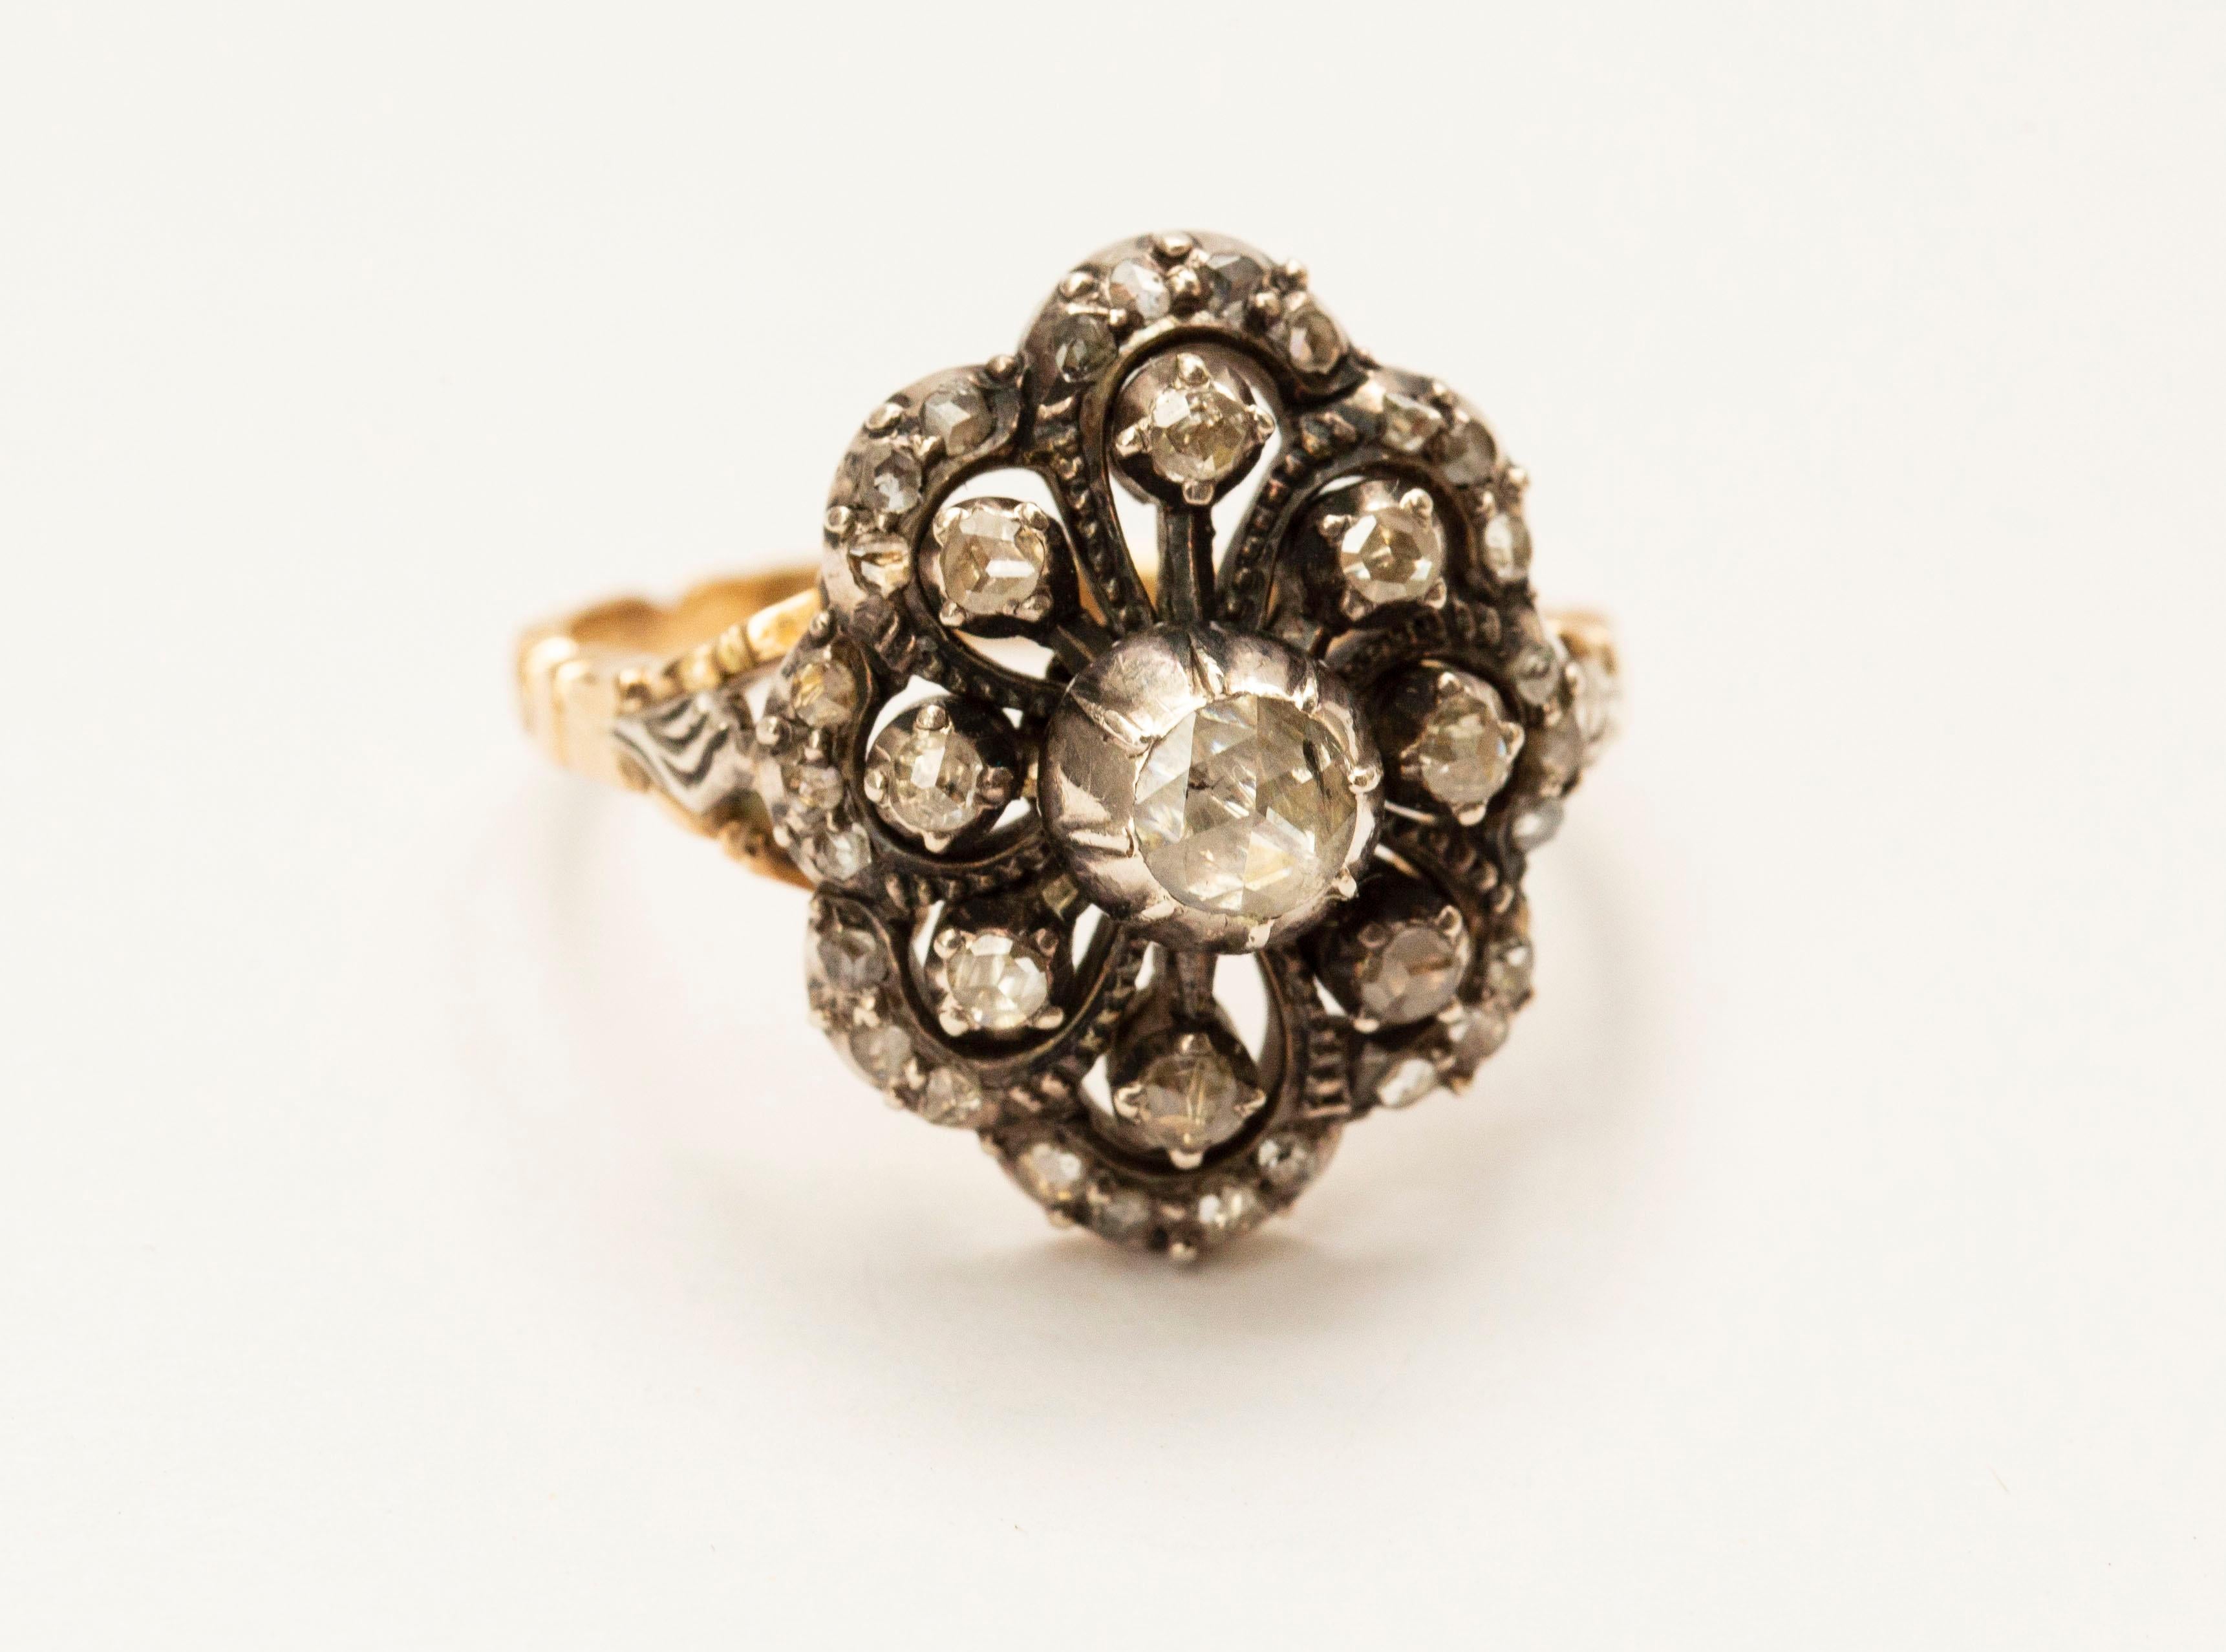 An antique Victorian (ca. 1900) diamond cluster ring /cocktail ring. The ring is made of 14 karat yellow gold and rose cut diamonds (in total 33 diamonds) set in silver foil. The ring features a flower form, and it is suitable to wear during daily